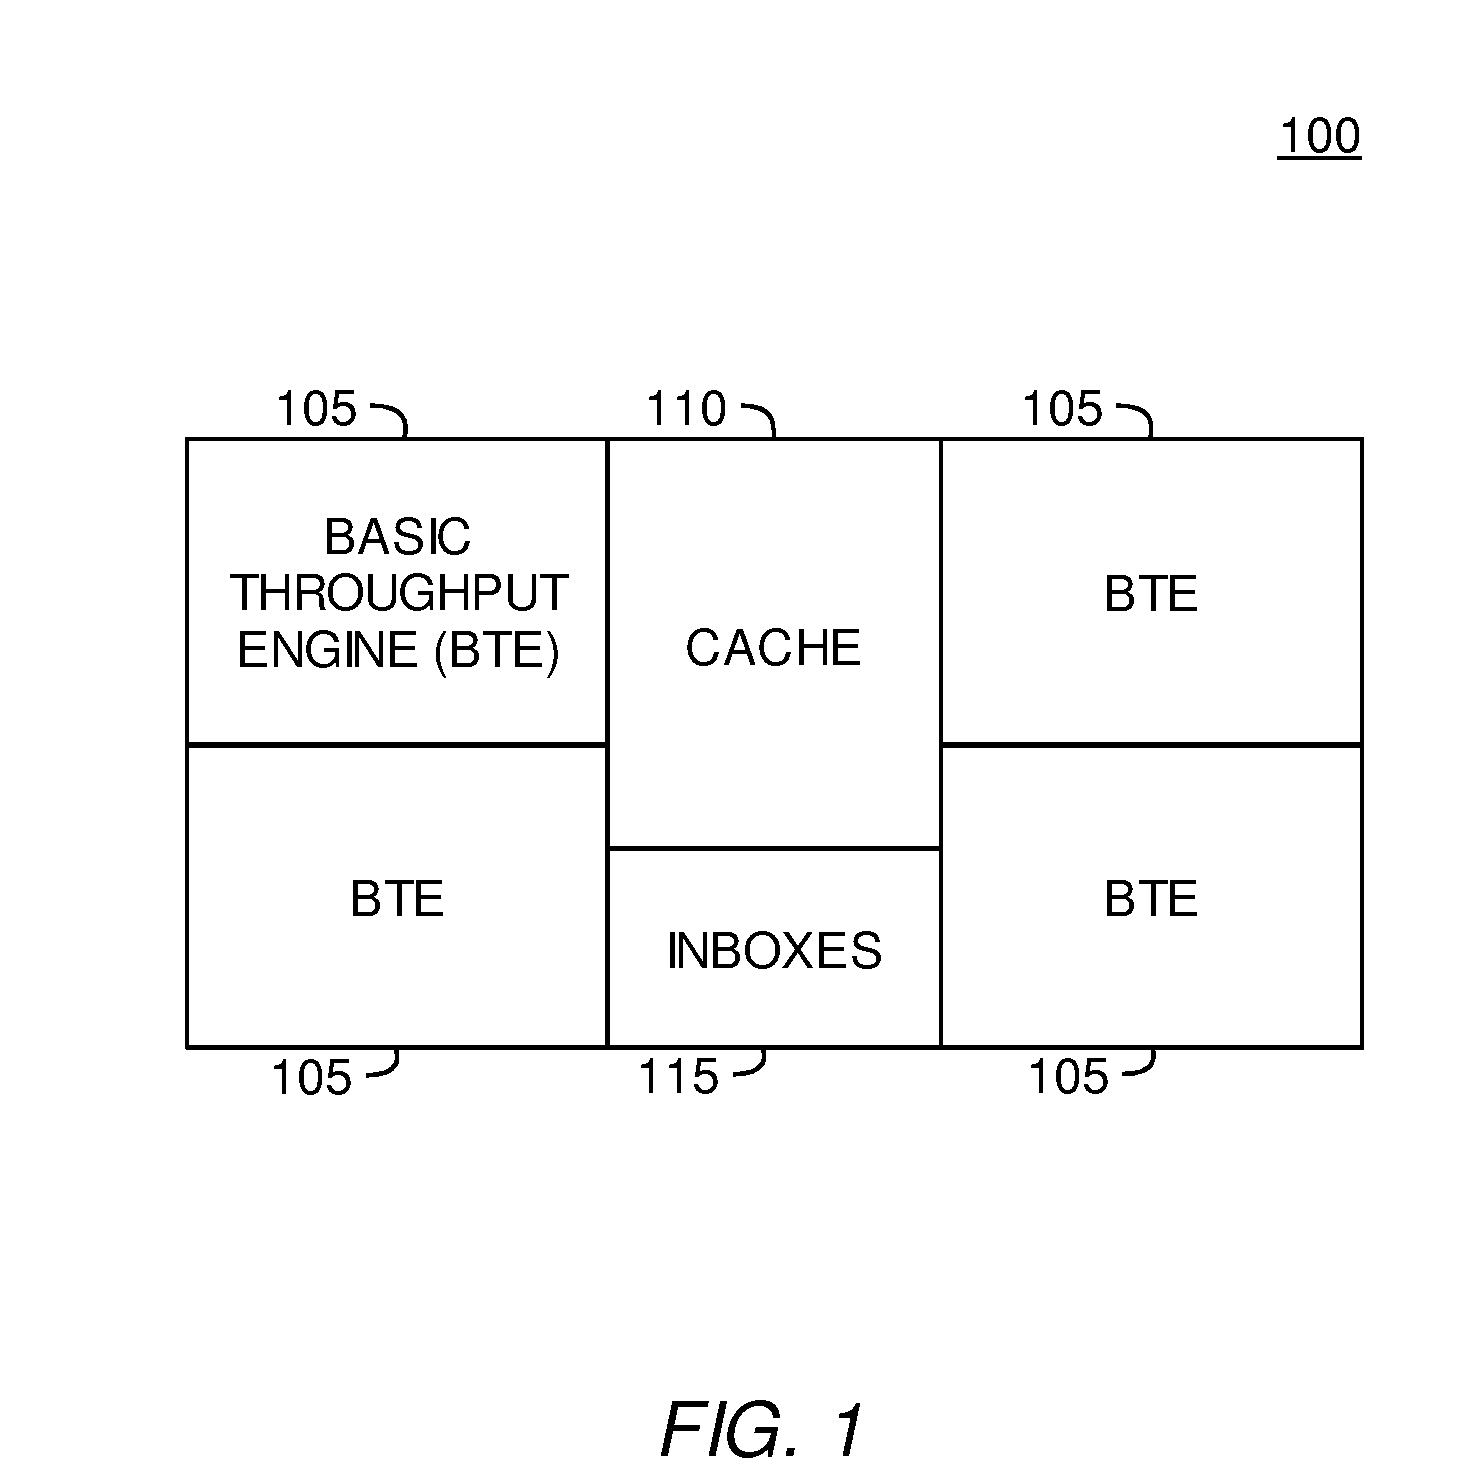 Methods and Systems for Referencing a Primitive Located in a Spatial Index and in a Scene Index